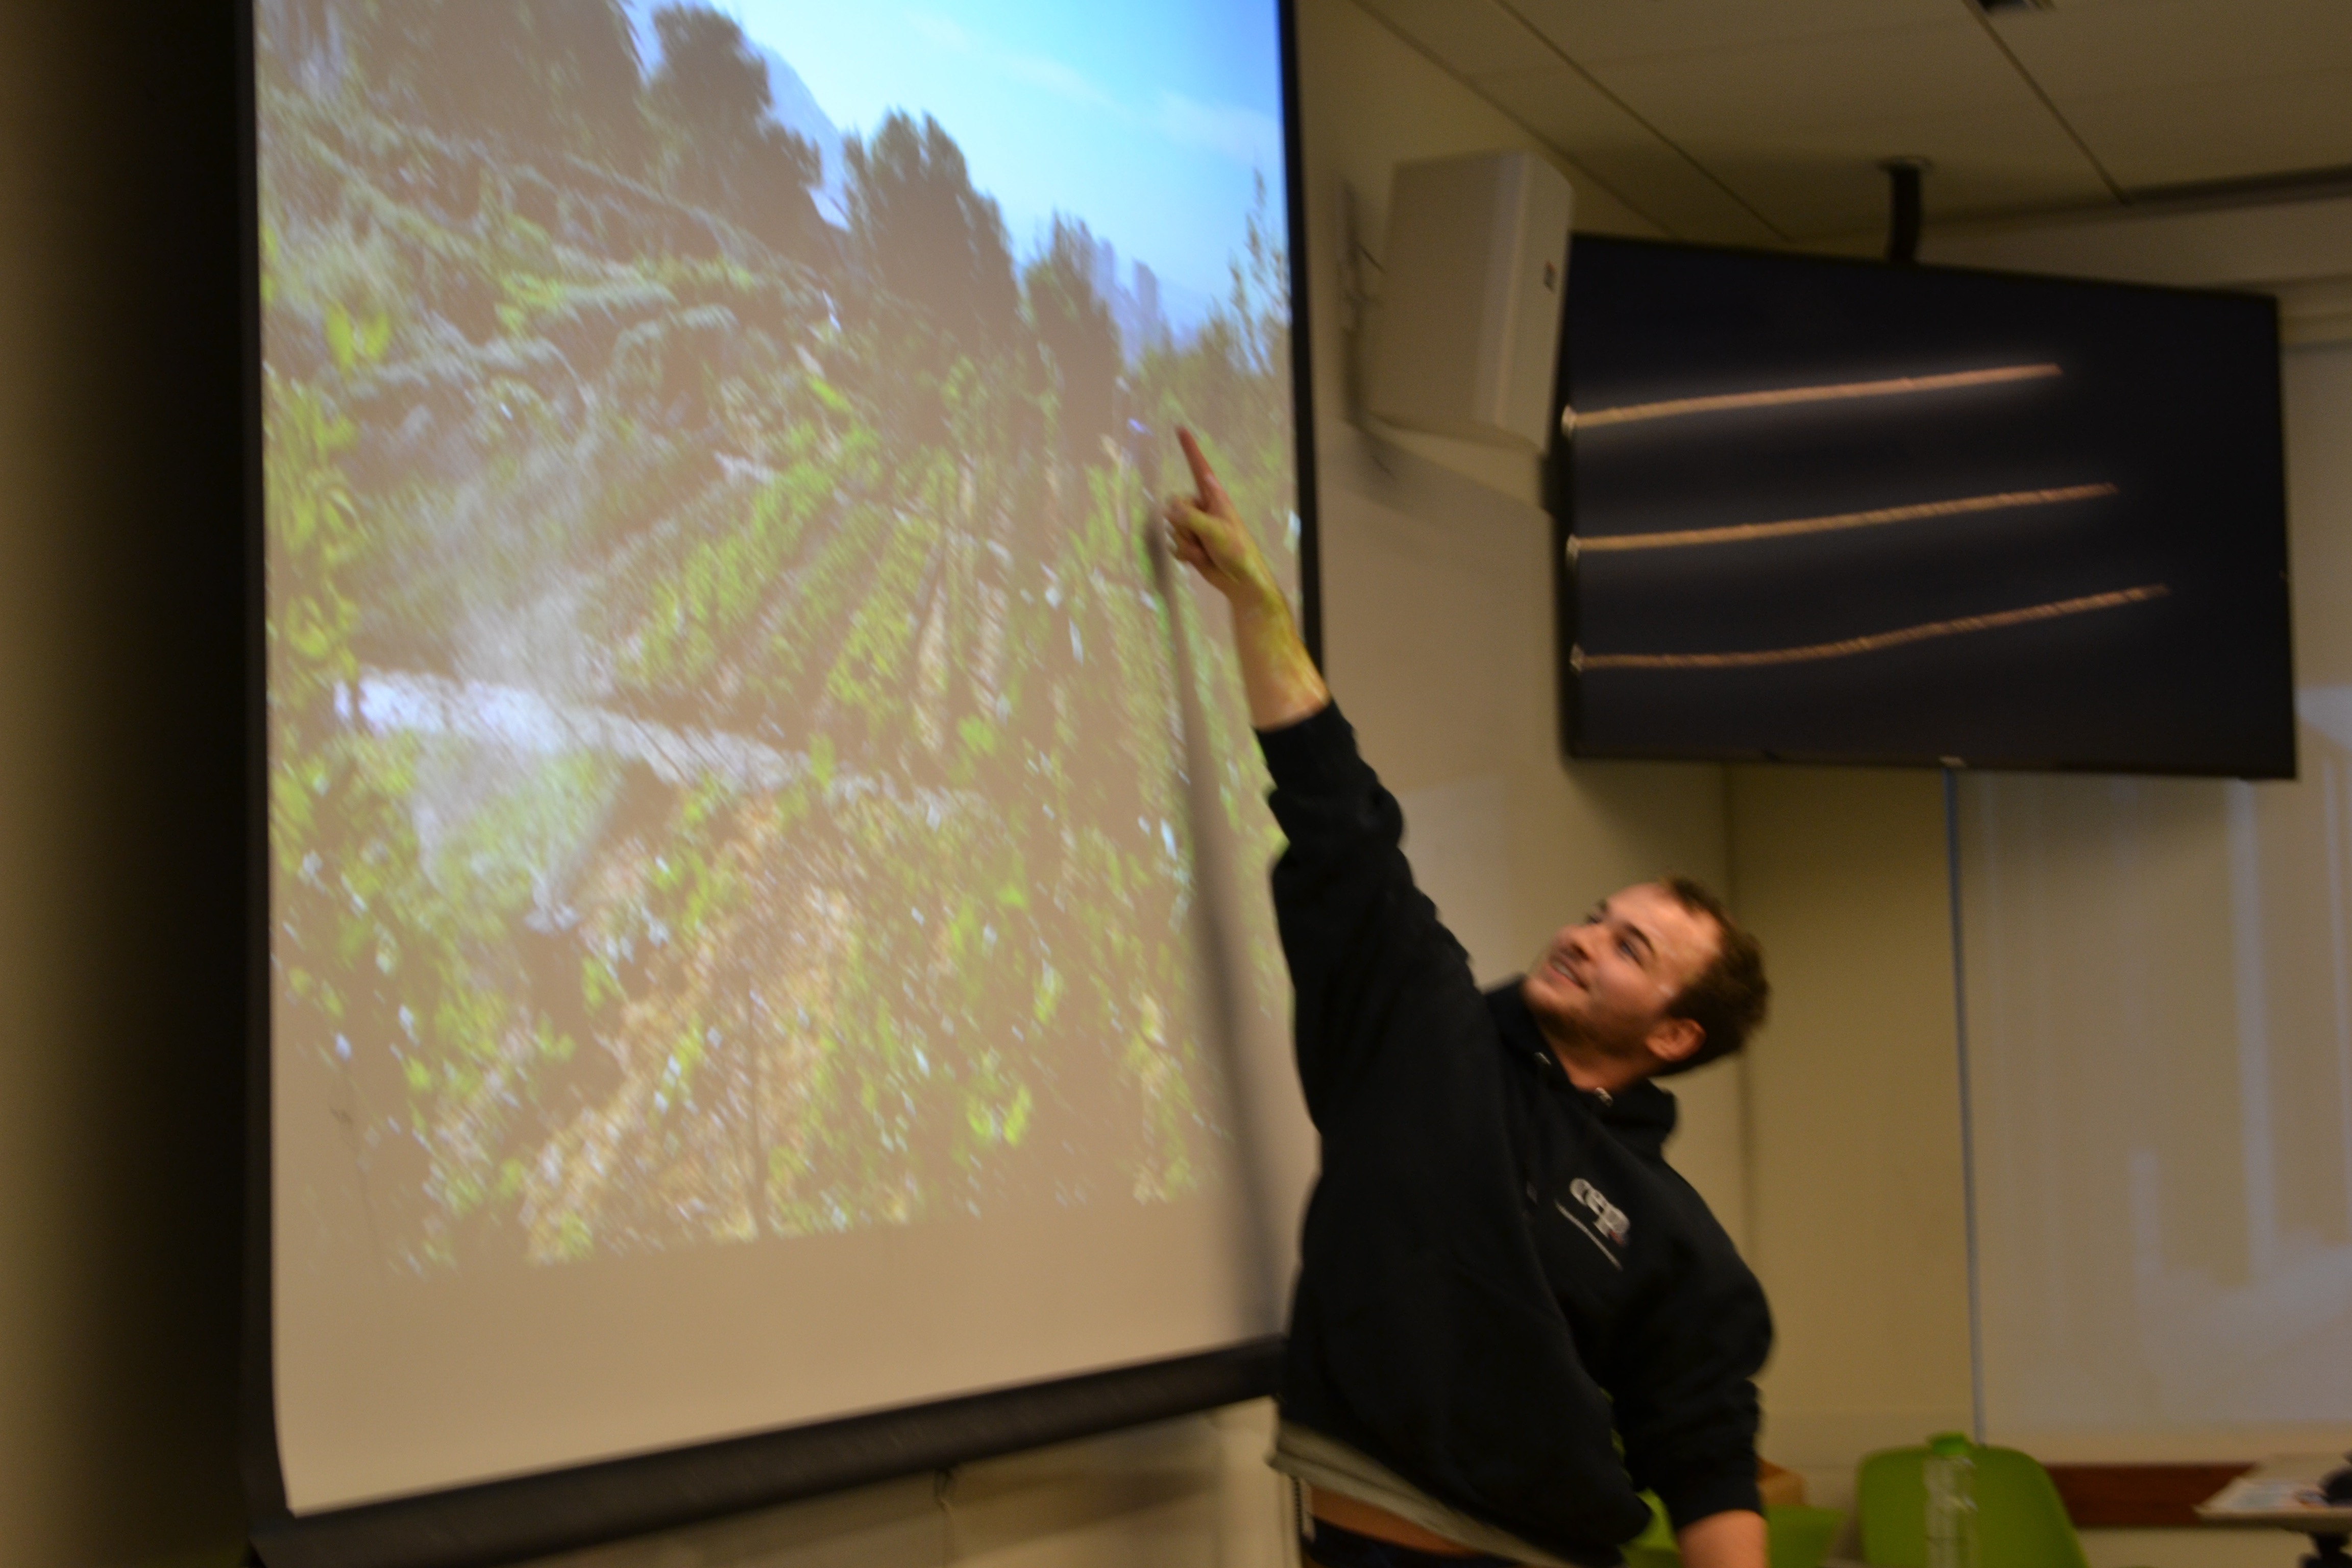 Kevin Freeman points out some of the crops on the farm where he worked for his co-op in Biology in South Africa.